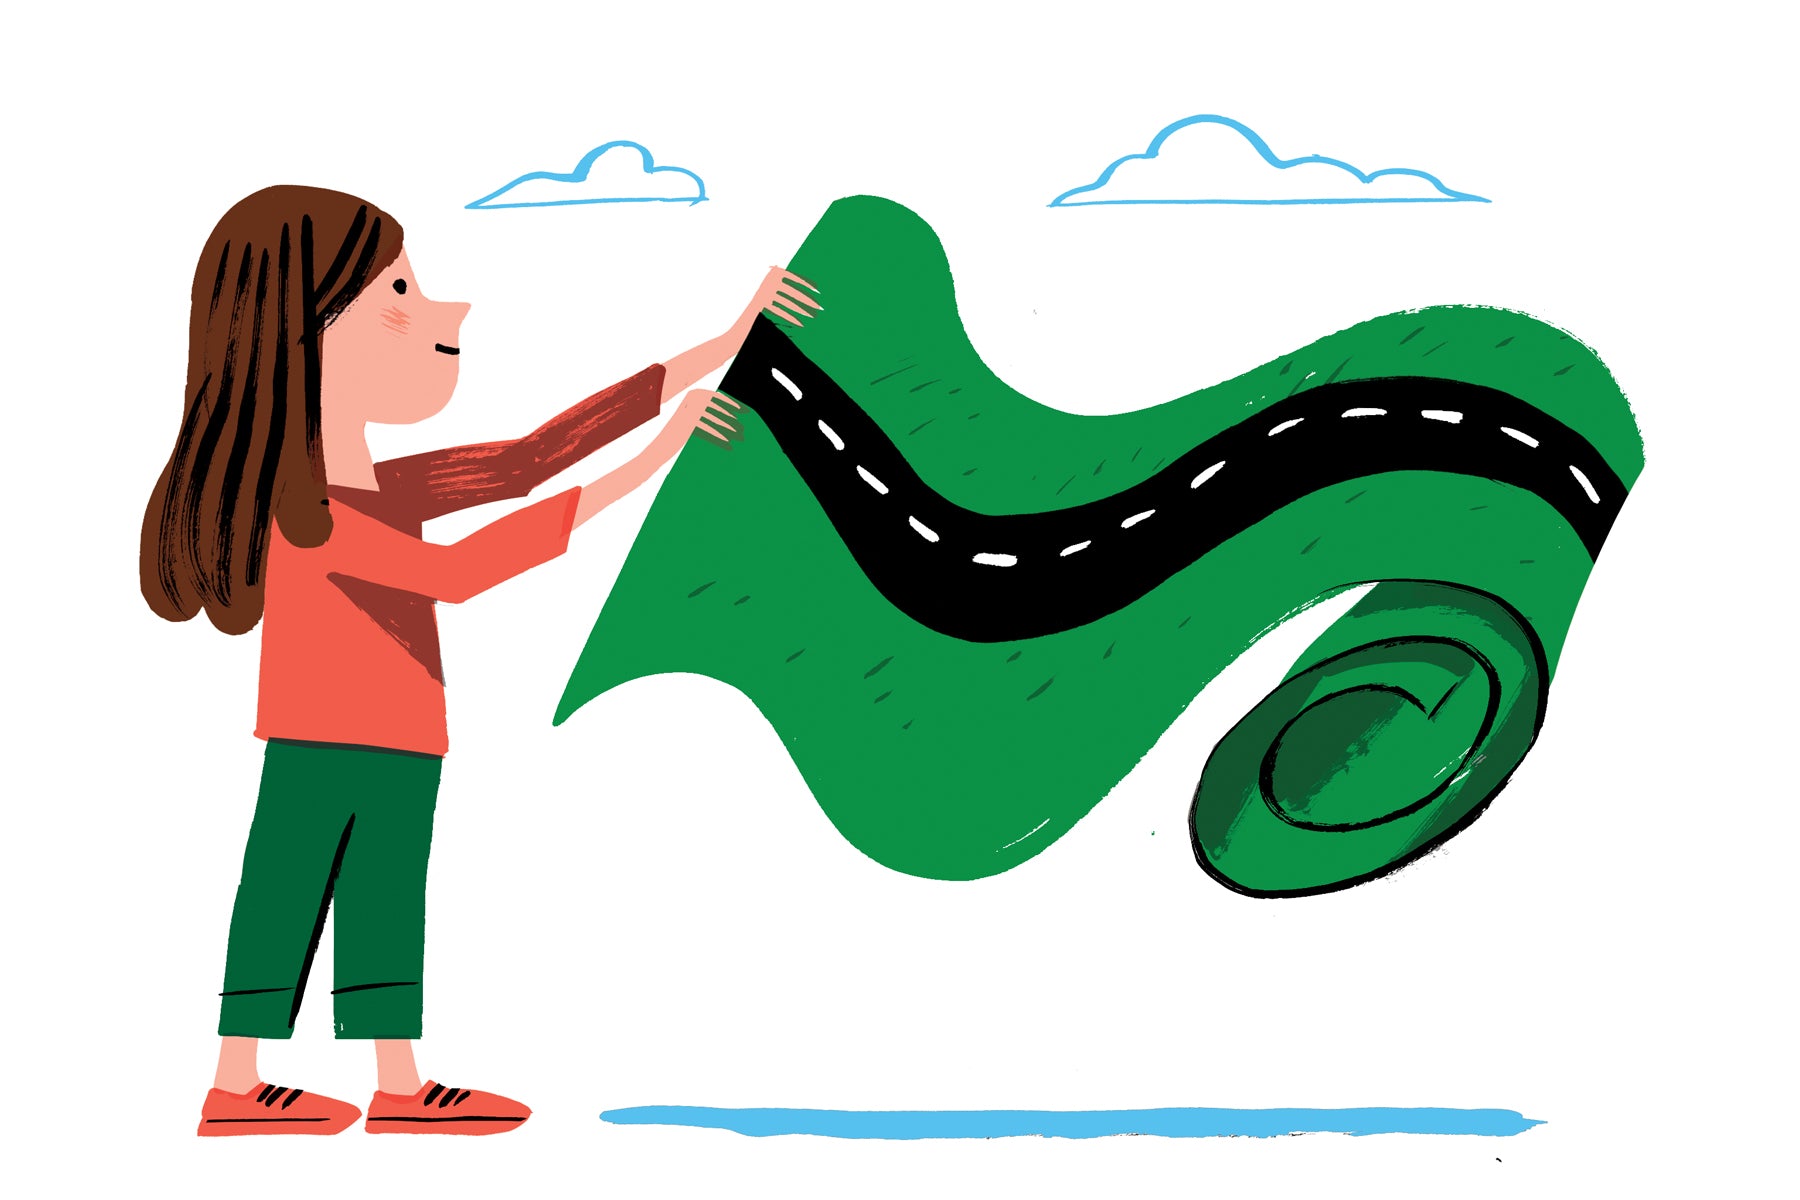 Illustration of a young caucasian girl in a red shirt with green pants, rolling out a carpet made of a road. This is a metaphor for how she started her business but also, also her future as an entrepreneur.